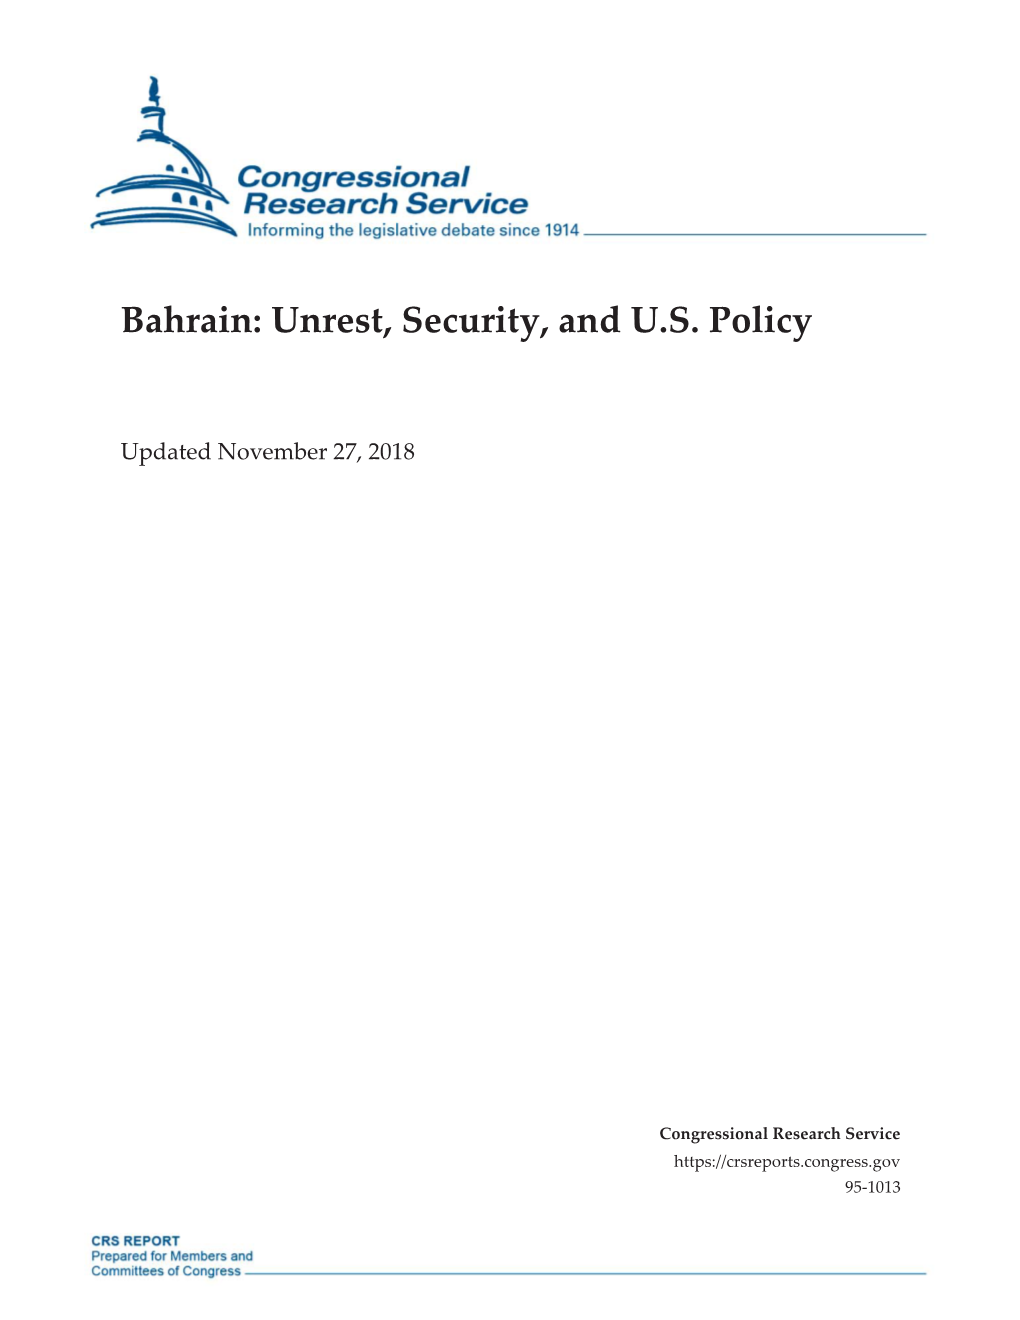 Bahrain: Unrest, Security, and U.S